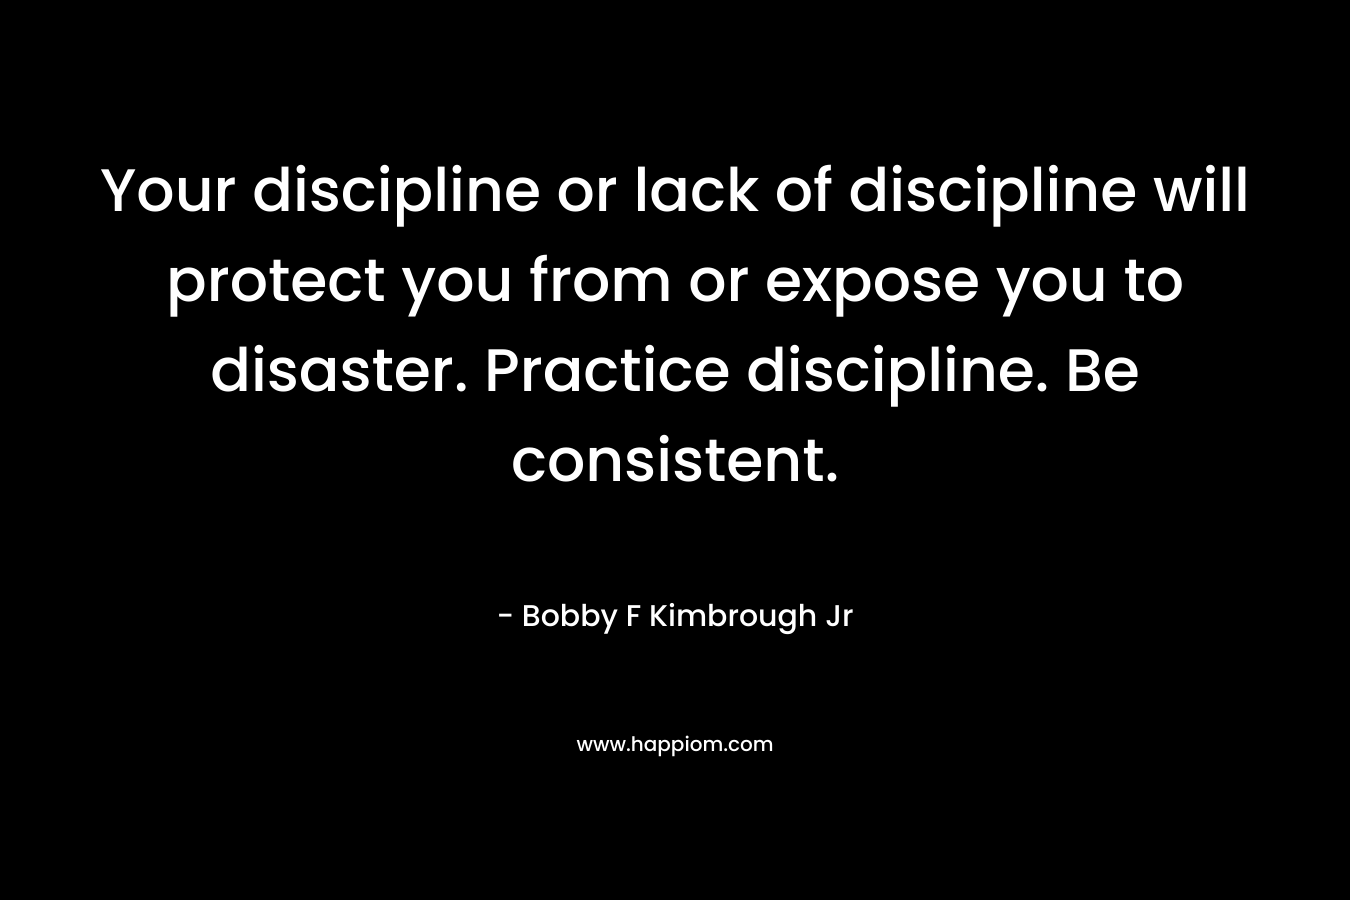 Your discipline or lack of discipline will protect you from or expose you to disaster. Practice discipline. Be consistent.